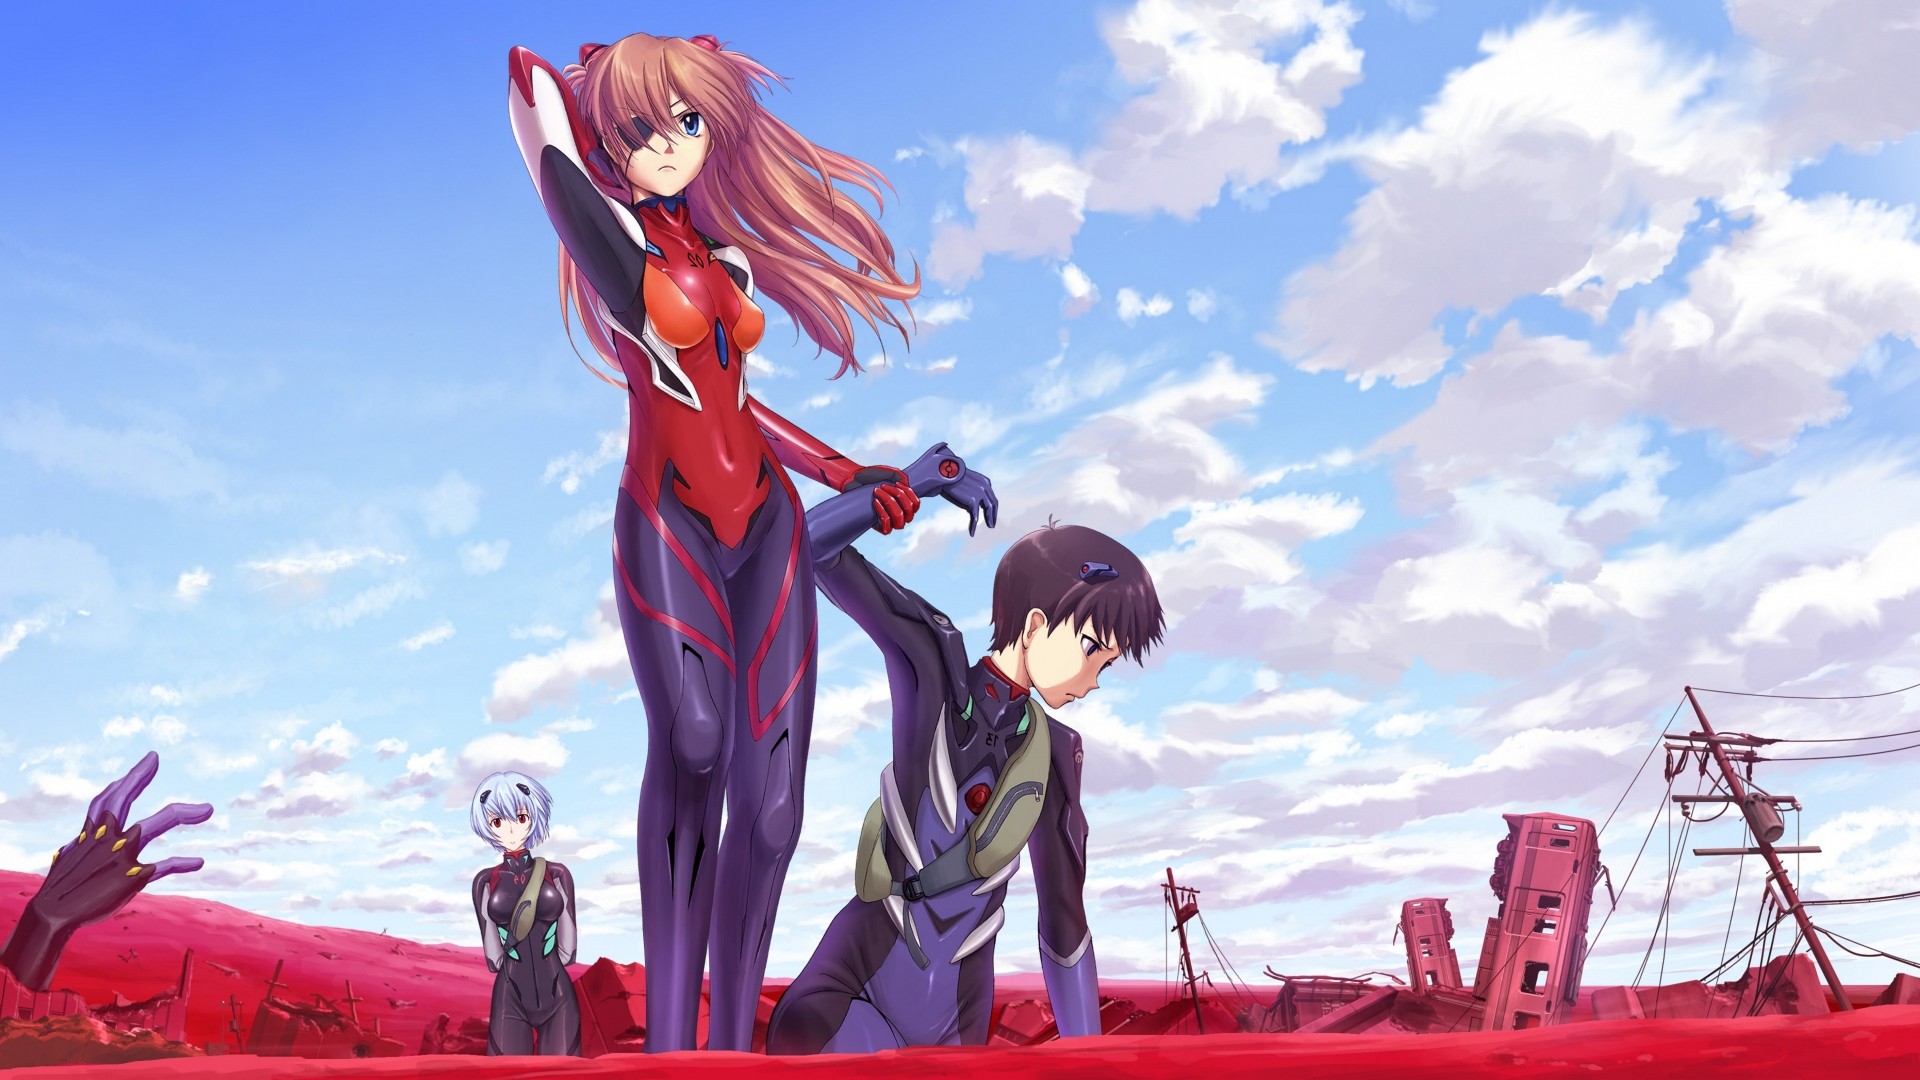 Download Neon Genesis Evangelion Rei Ayanami Asuka Langley Good Funny Anime Wallpaper In Many Resolutions